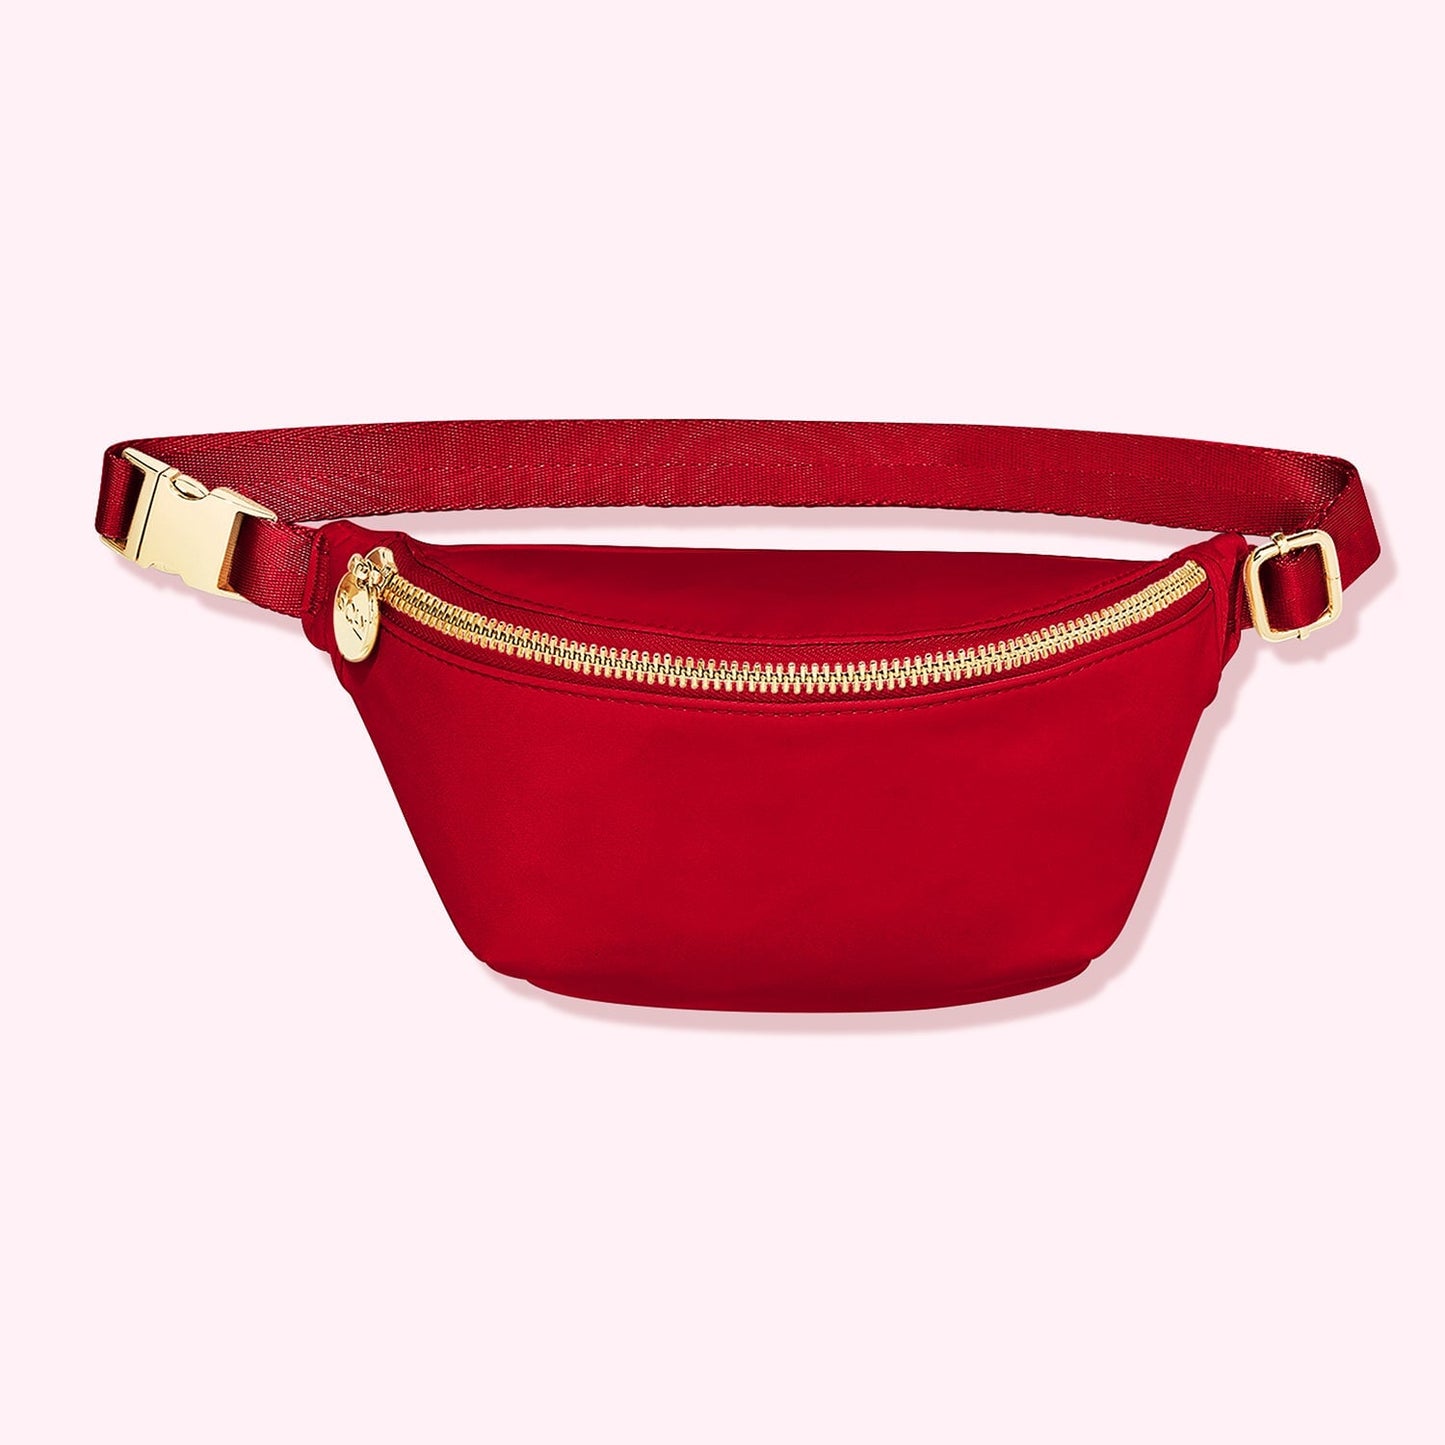 Africa Fanny Pack/ CrossBody Bag - Red Leather